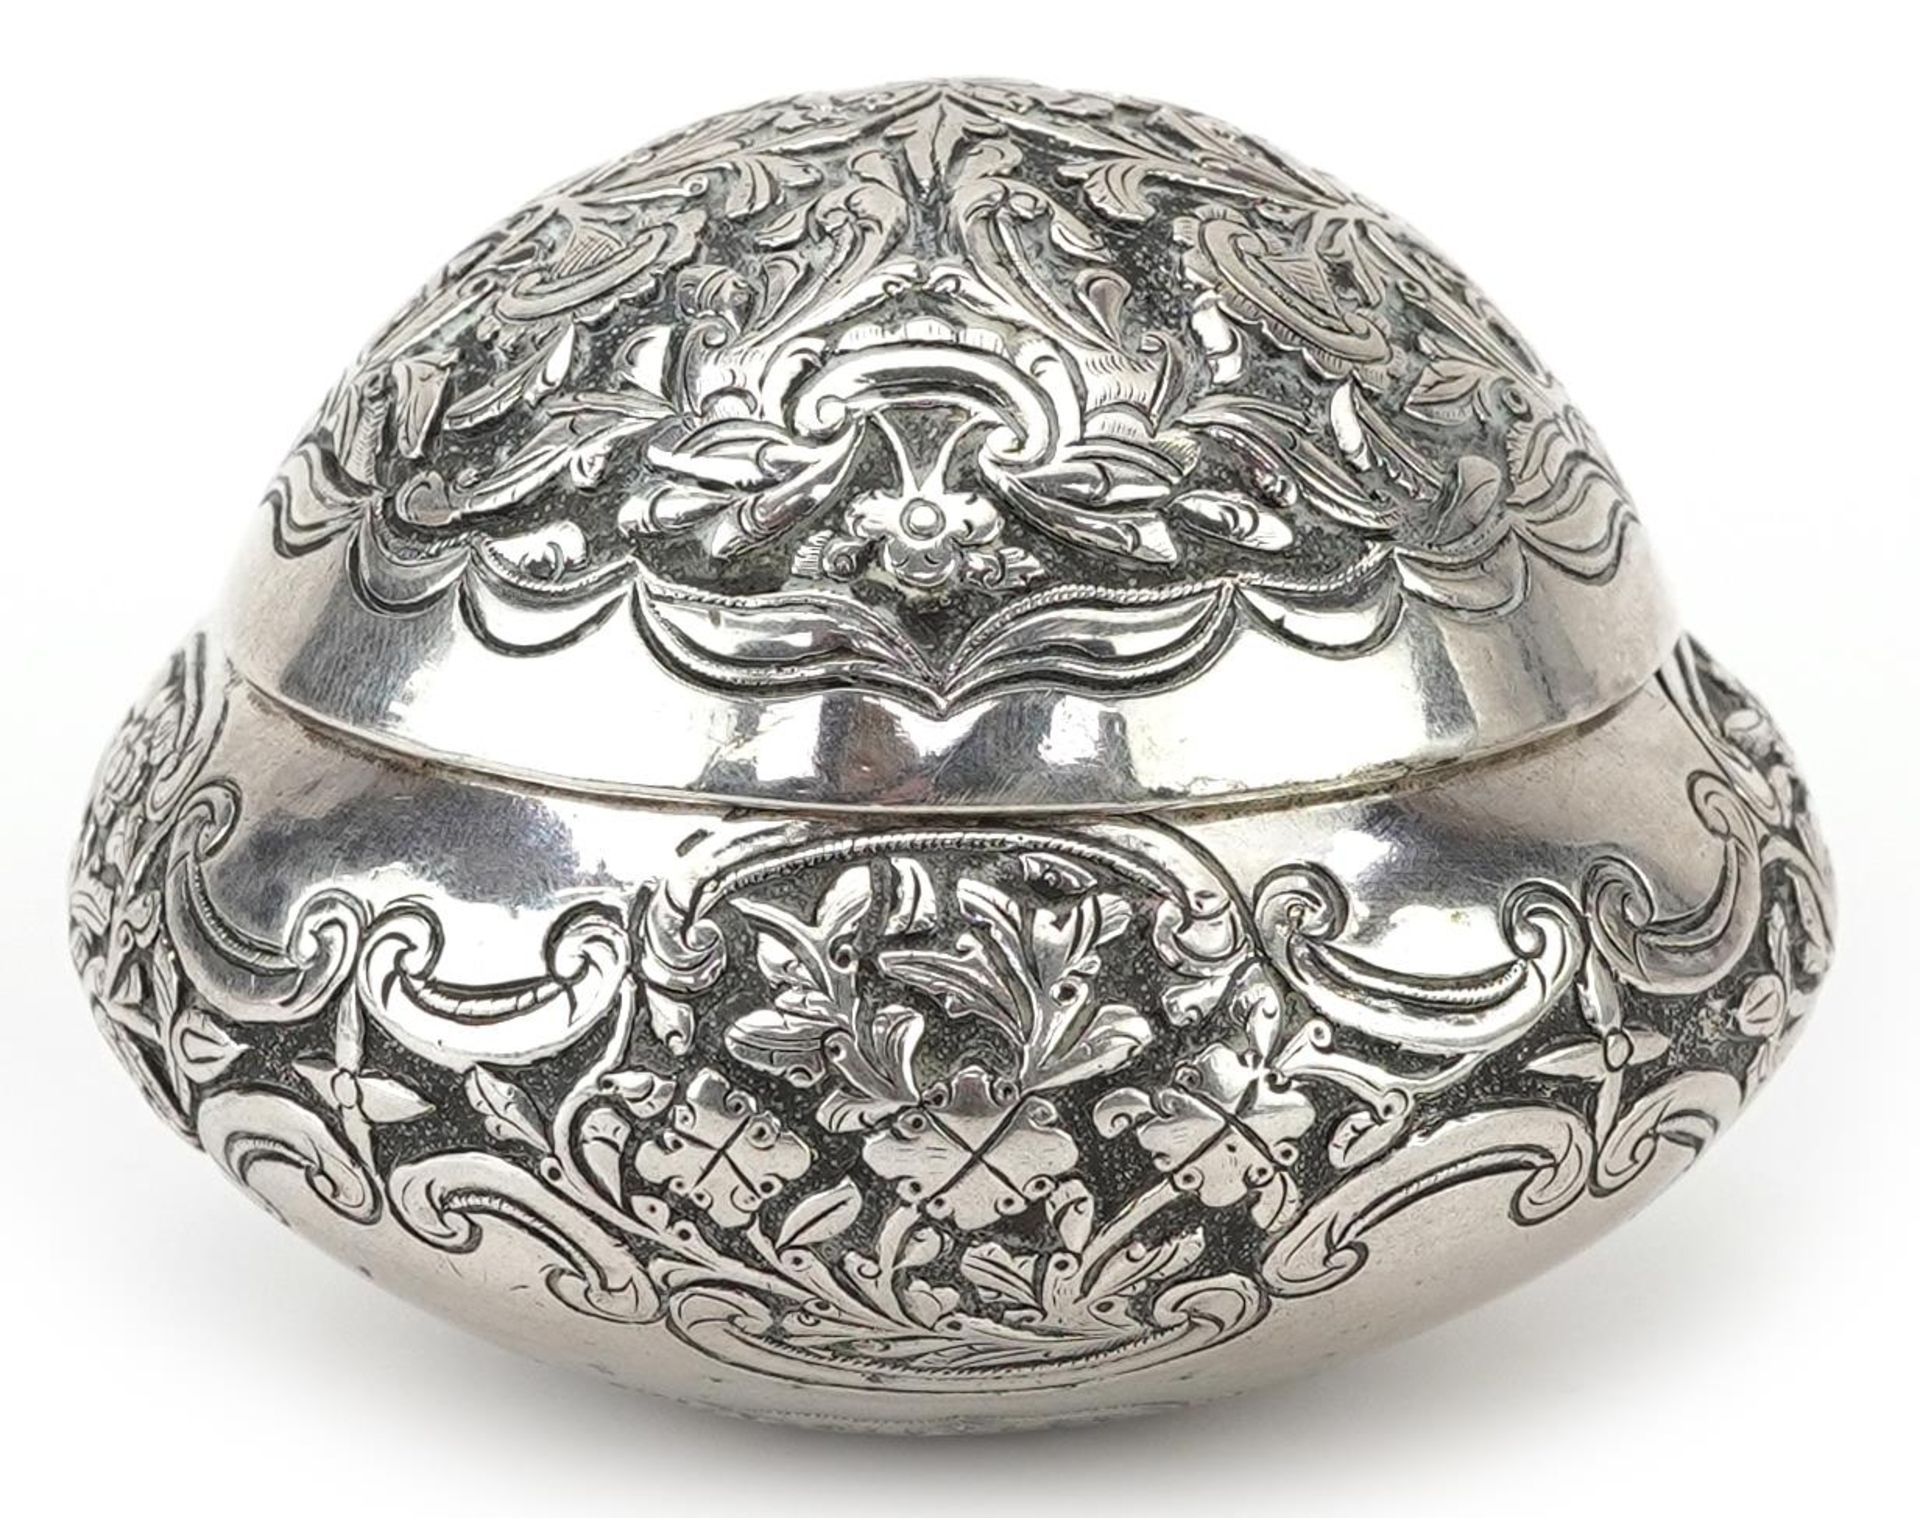 Tibetan unmarked silver bun shaped box with hinged lid profusely embossed with flowers and